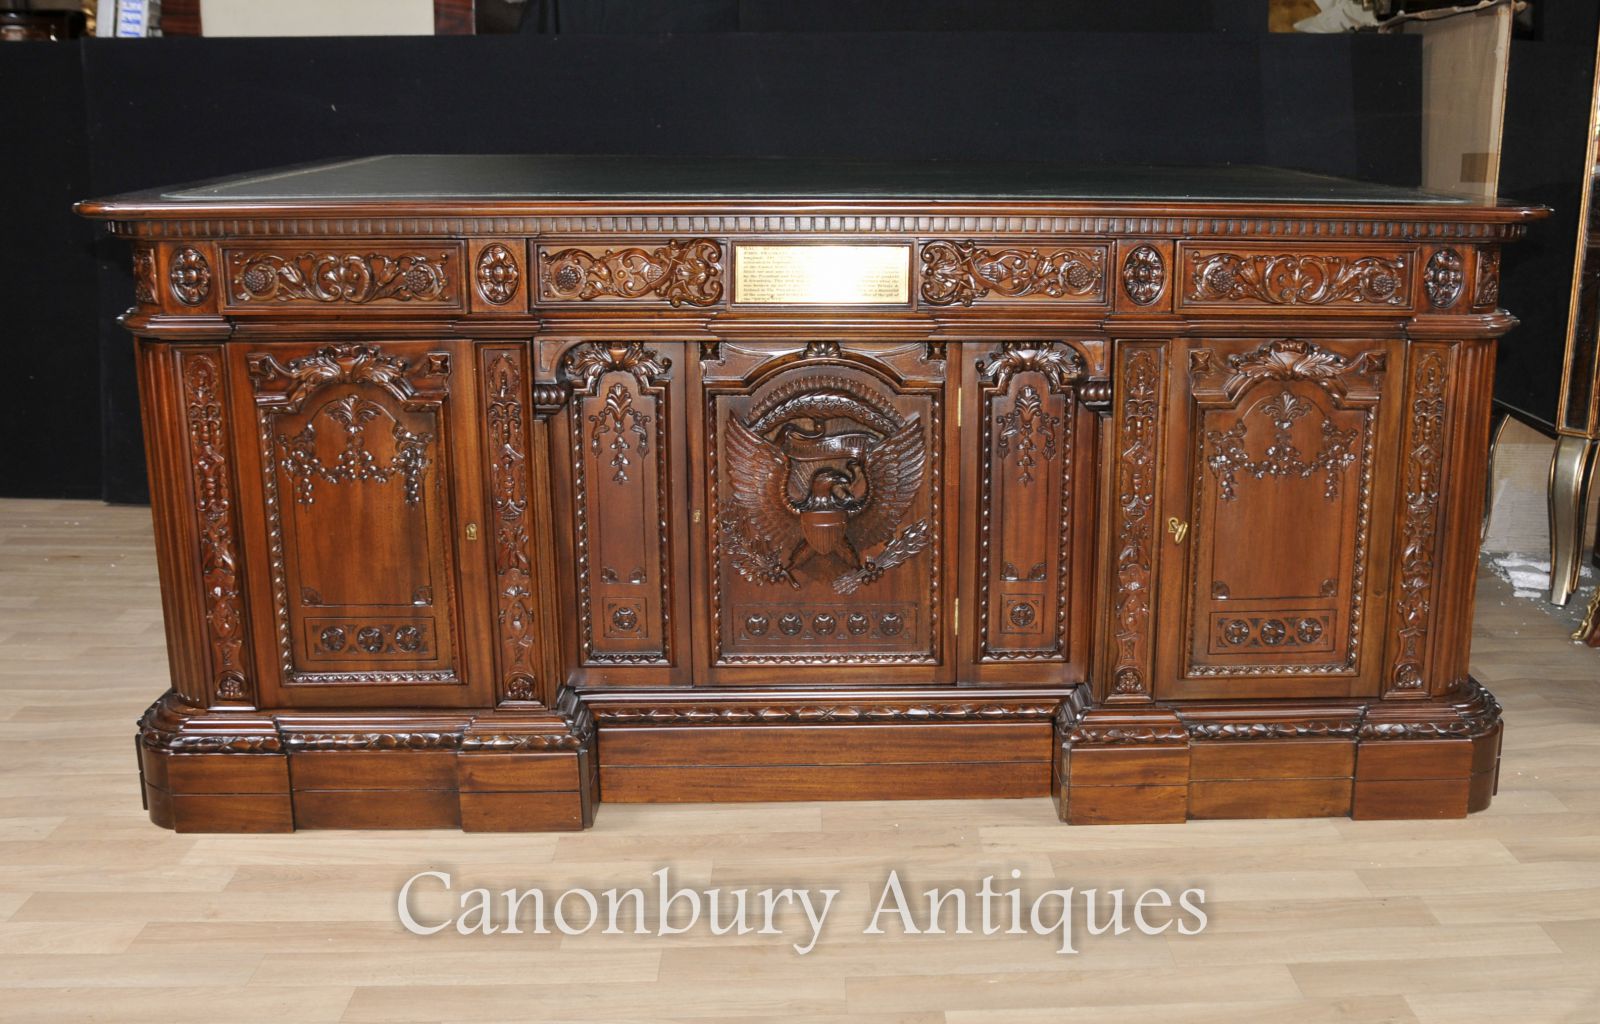 Look at the wonderful carving on this mahogany Presidents desk